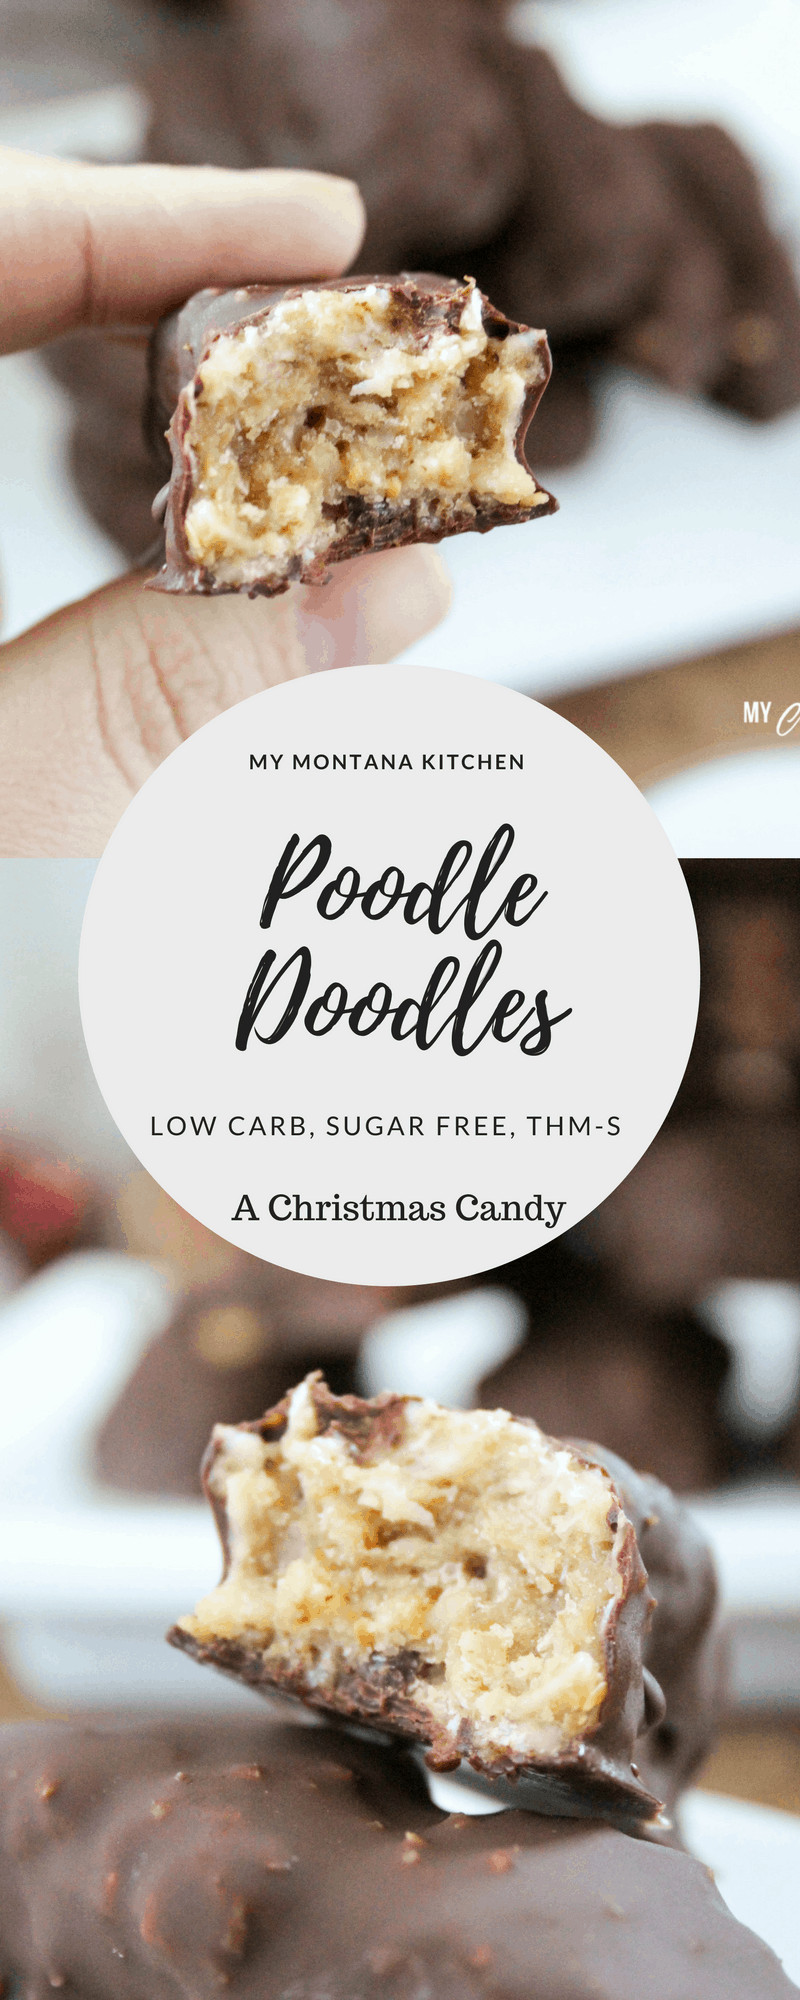 Sugar Free Christmas Candy
 Poodle Doodles